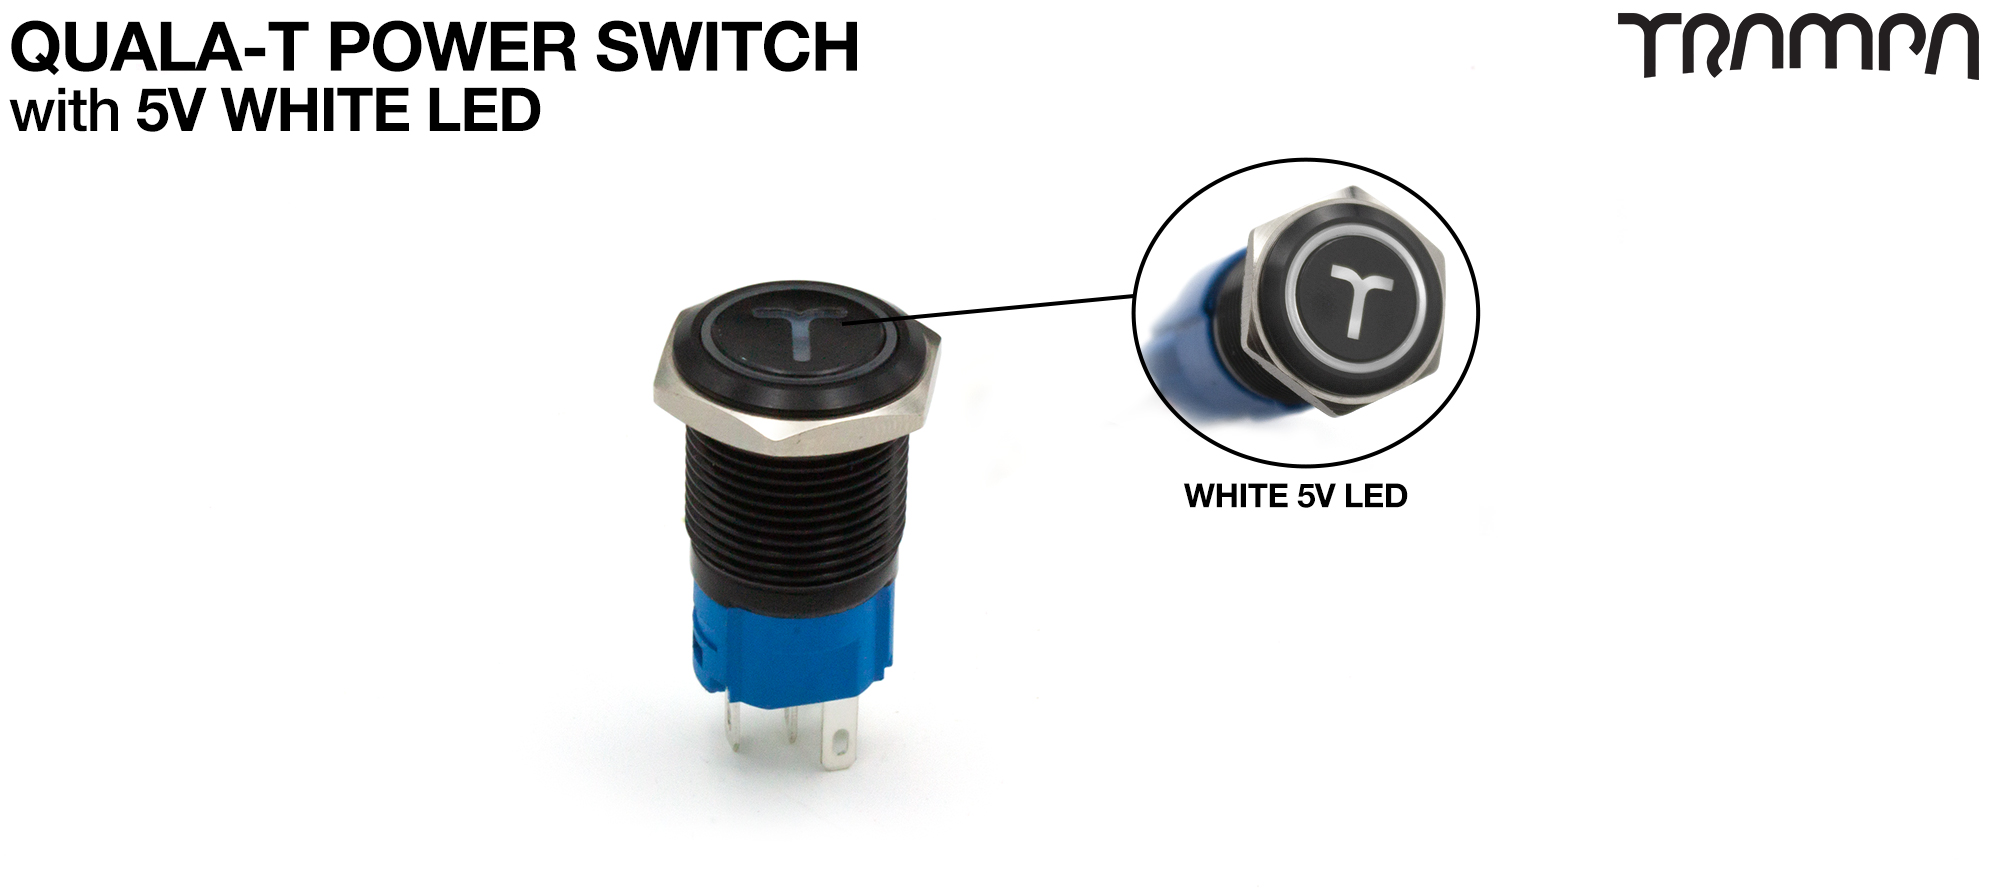 TRAMPA Switch with 5V WHITE LED QUALA-T logo & 16mm Stainless Steel Fixing Nut 